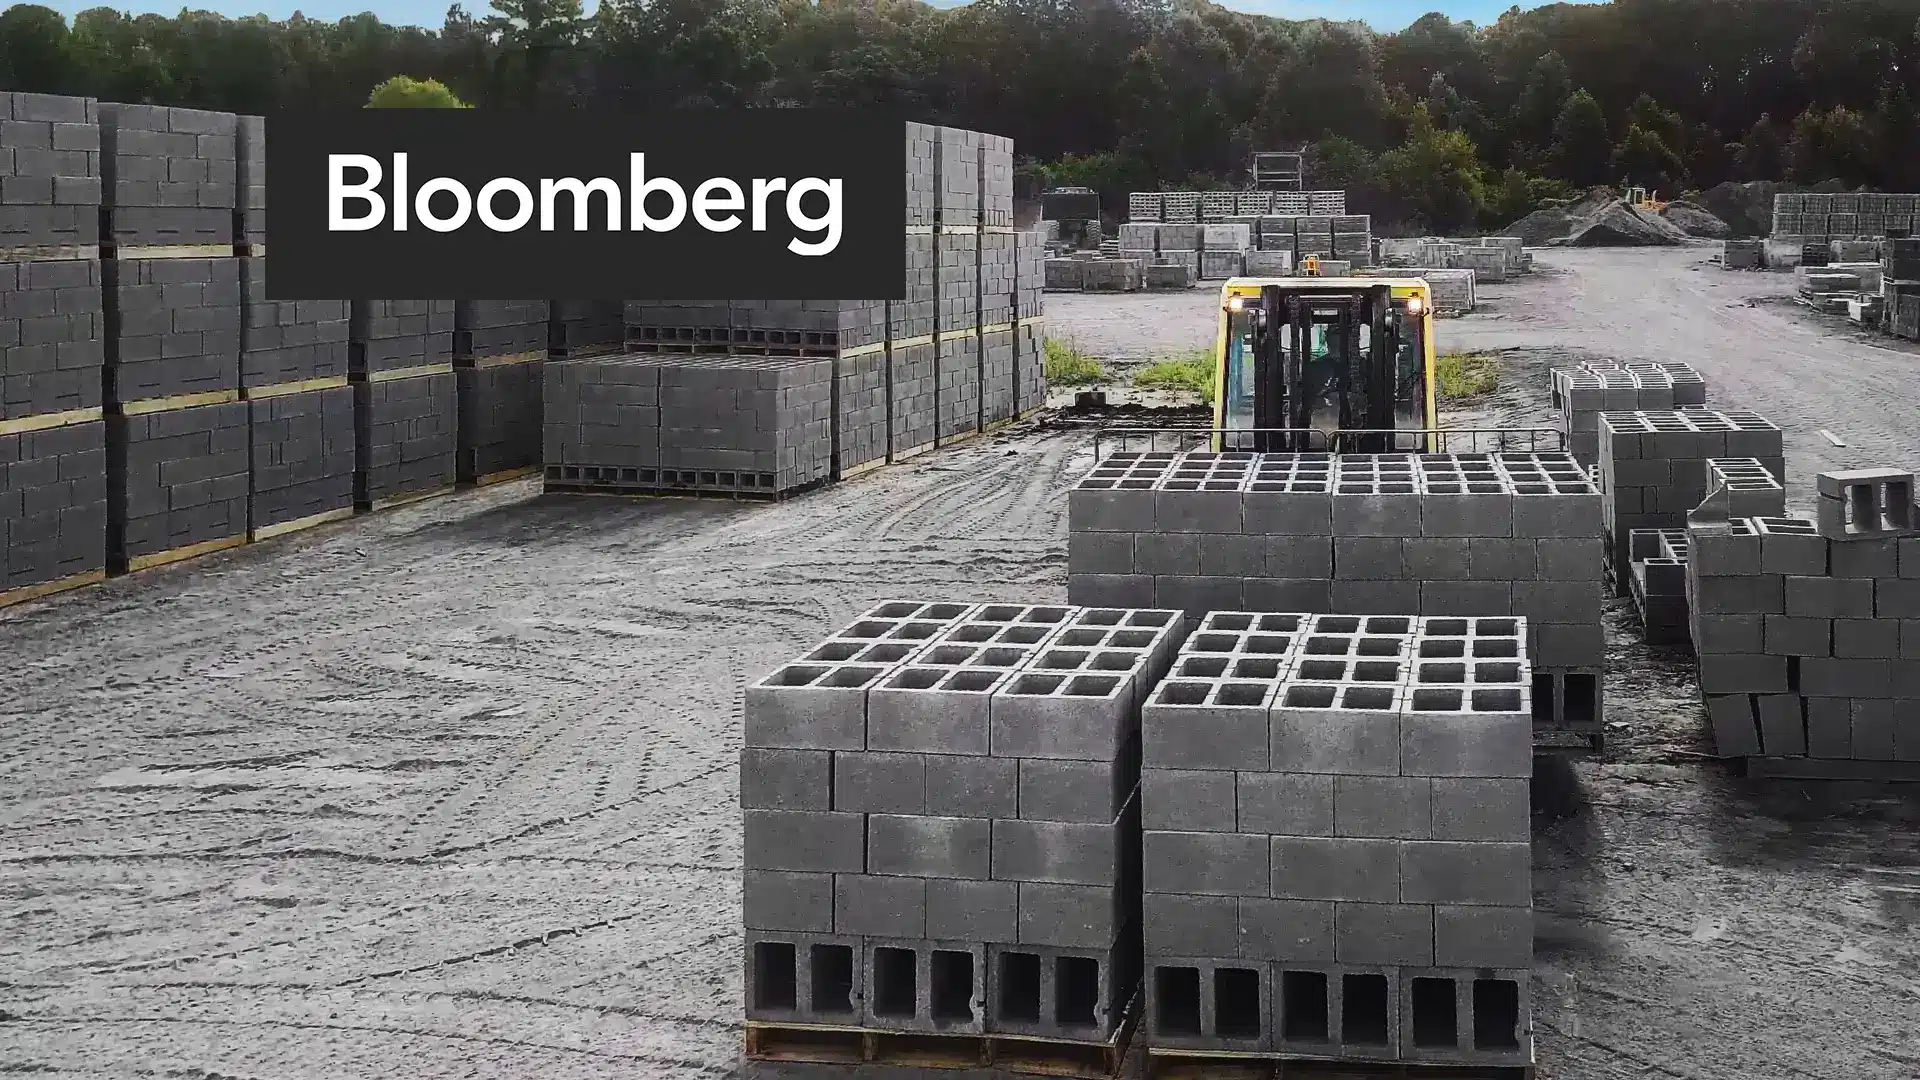 Bloomberg Green covered CarbonBuilt's commercial launch of ultra-low carbon concrete blocks. Photographer Mark Scantlebury captured the blocks awaiting customer delivery at Blair Block's concrete plant in Childersburg, Alabama.